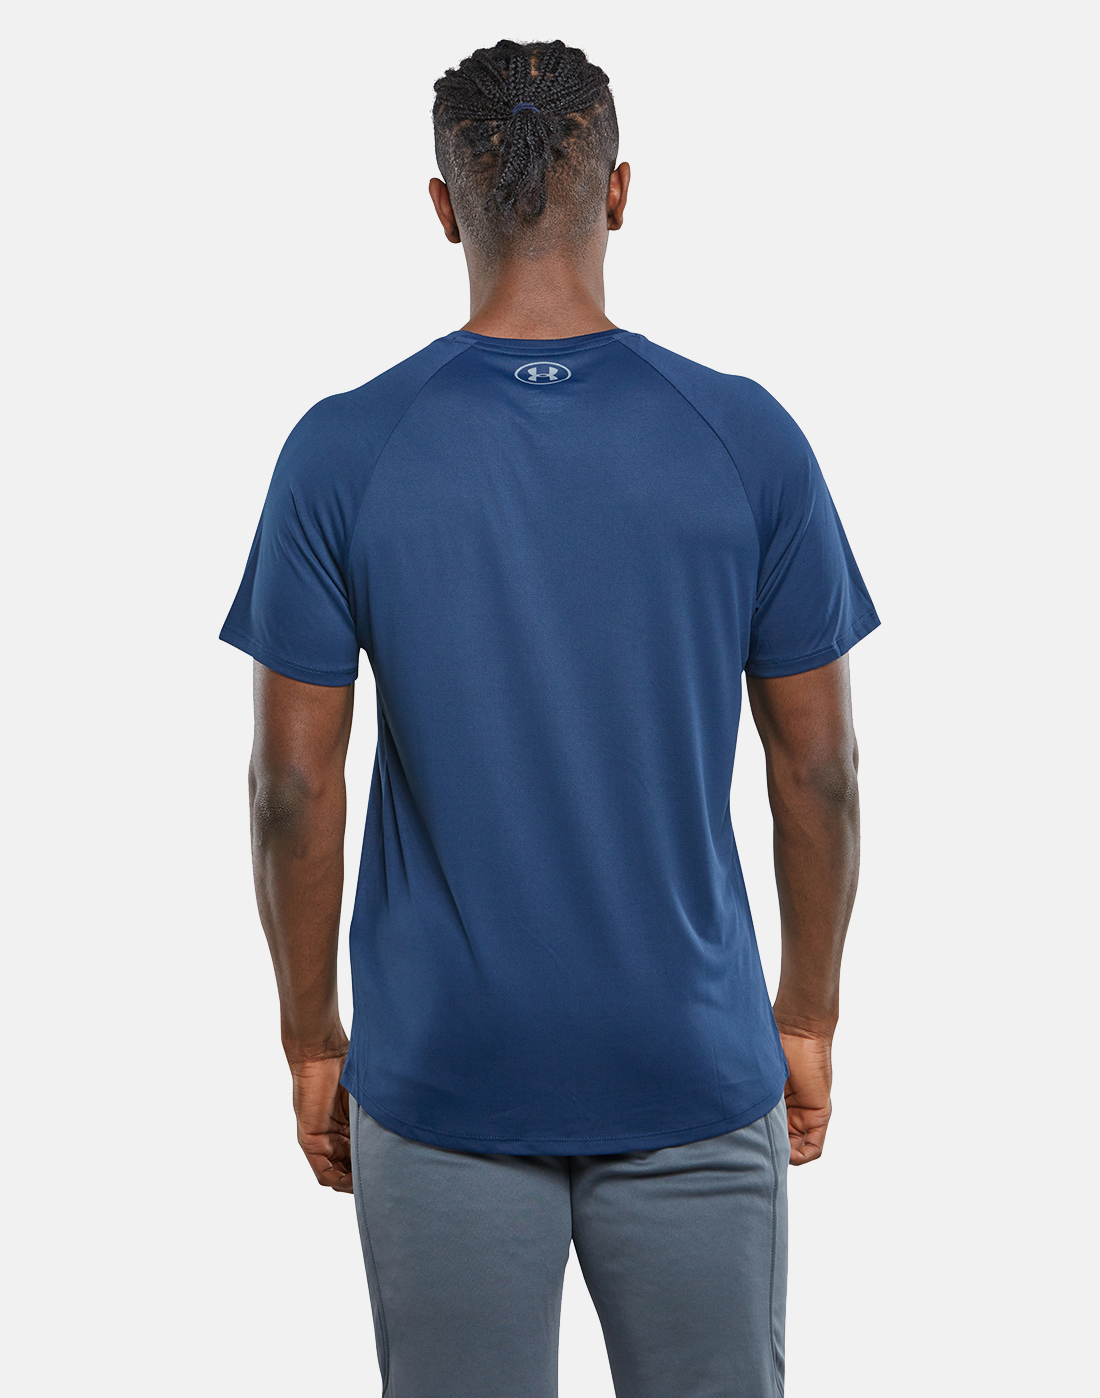 Under Armour Mens Tech 2.0 T-shirt - Navy | Life Style Sports IE